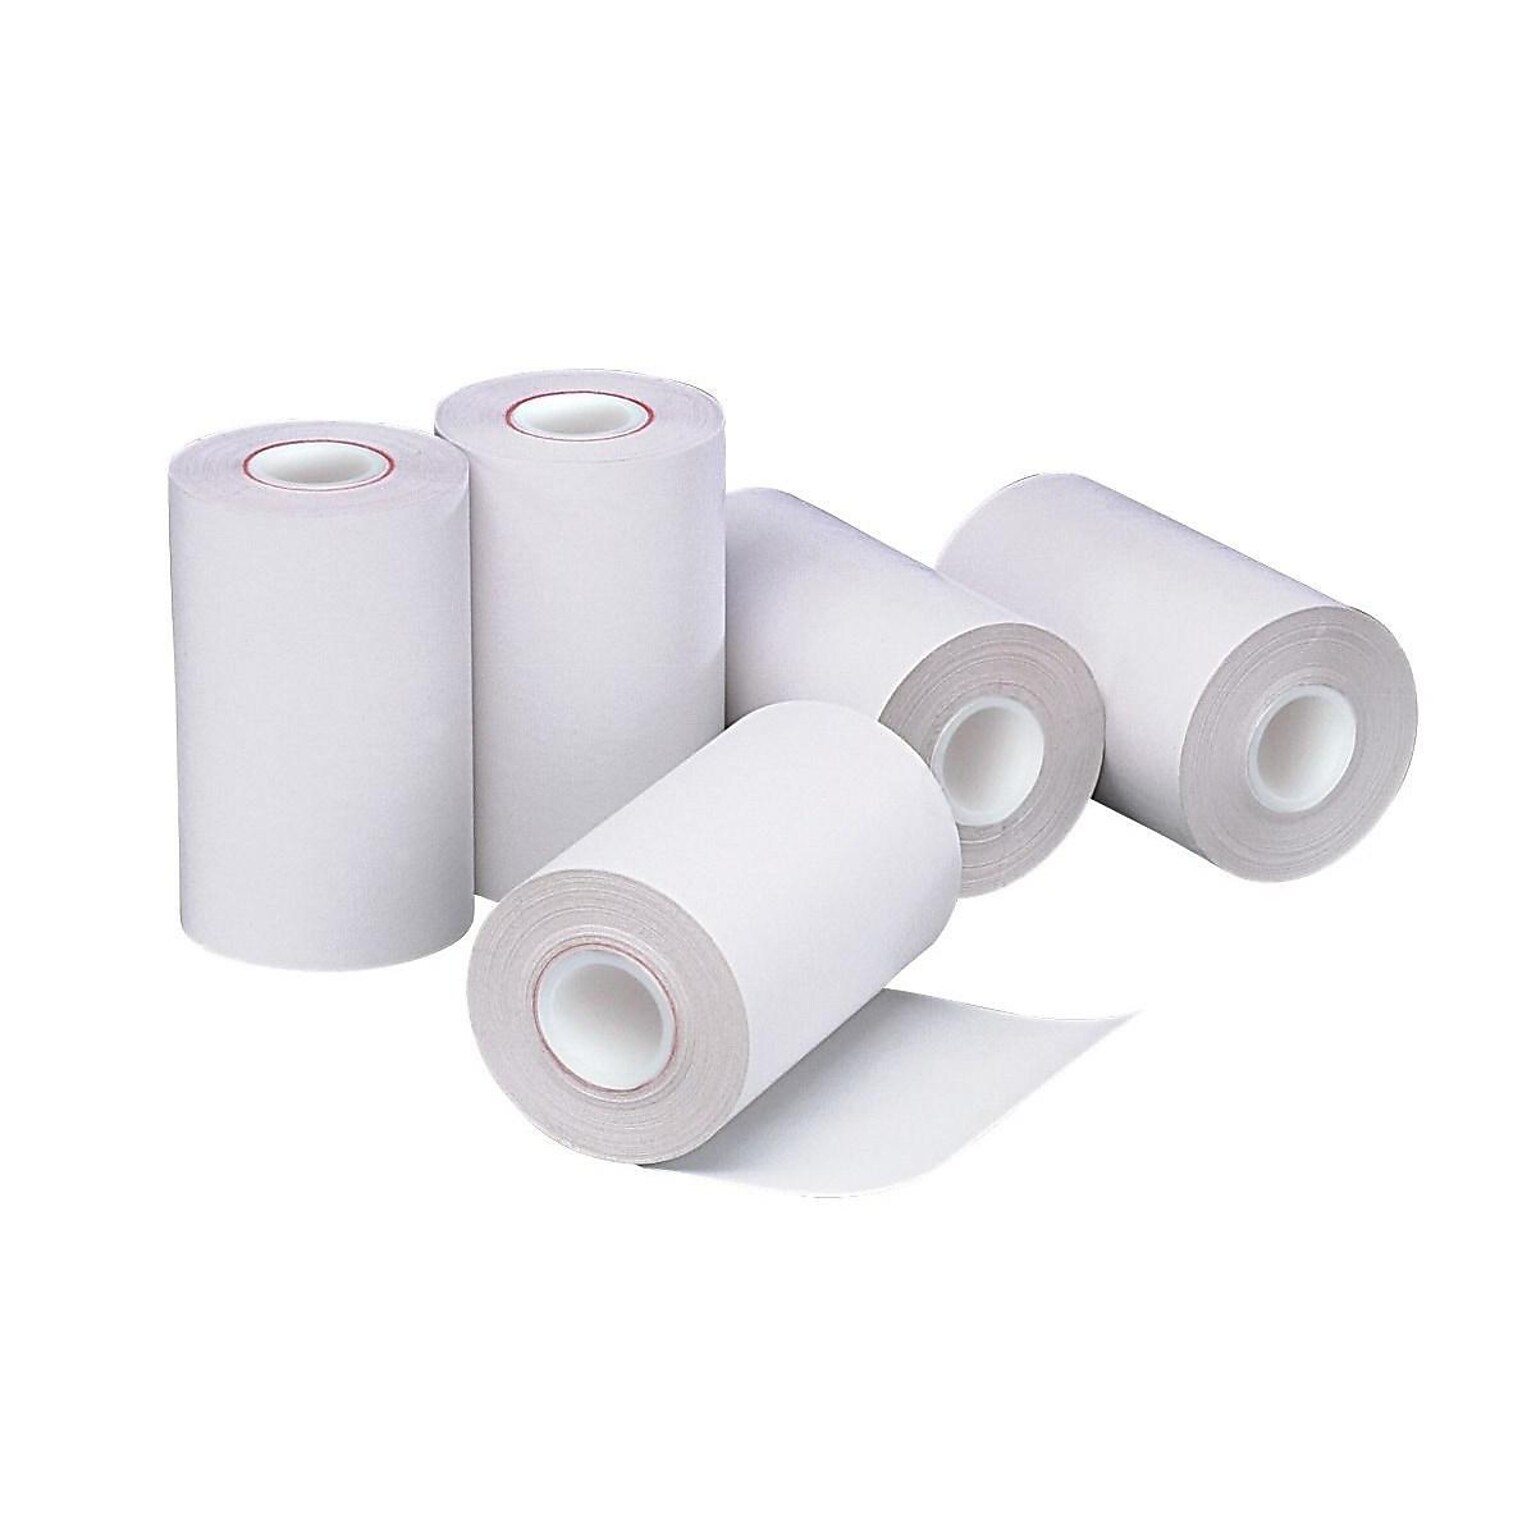 PM Company Perfection Thermal Cash Register Paper Rolls, 2 1/4 x 42, BPA Free, 48 Rolls/Pack (9078-2981)